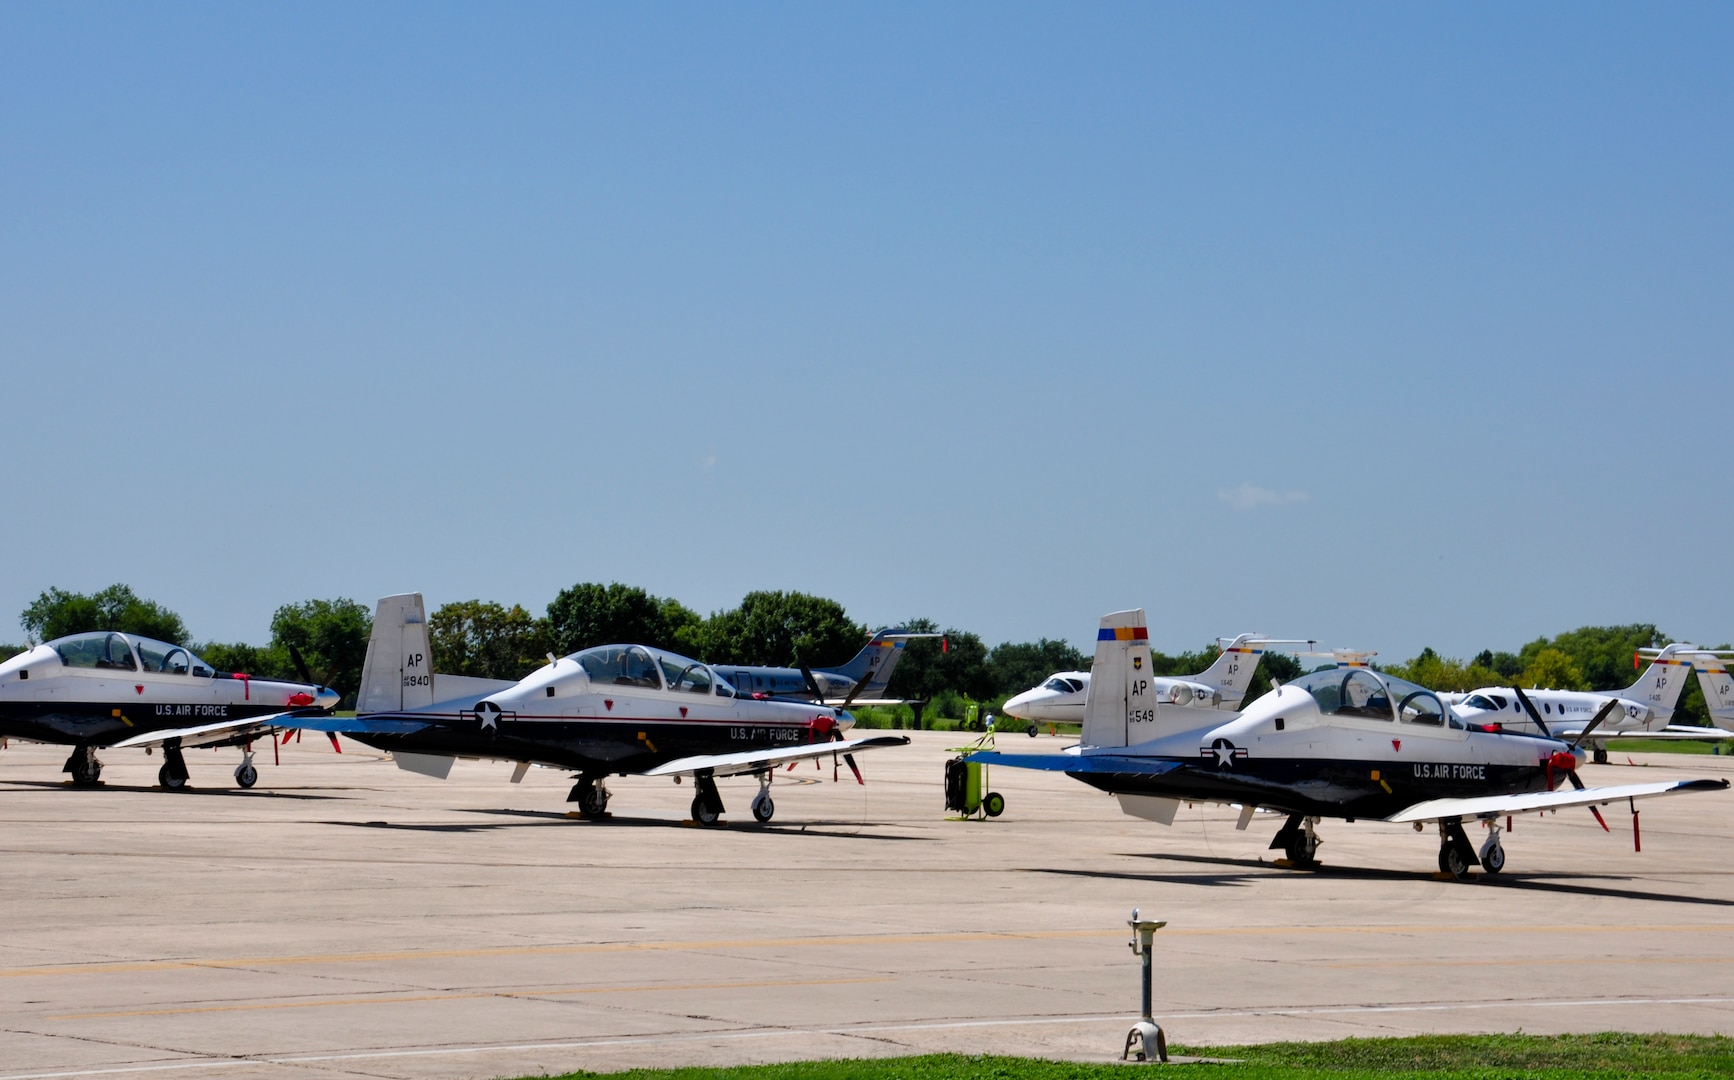 T-6 Texan II and T-1 Jayhawk aircraft from the 479th Flying Training Group, at Naval Air Station Pensacola, Fla., arrived at Joint Base San Antonio-Randolph, Texas August 26, 2012, in anticipation of Tropical Storm Isaac. The 479th FTG is a geographically separated unit of the 12th Flying Training Wing and is responsible for training all U.S. Air Force Combat Systems Officers. (U.S. Air Force photo by 2nd. Lt. Keenan Kunst)